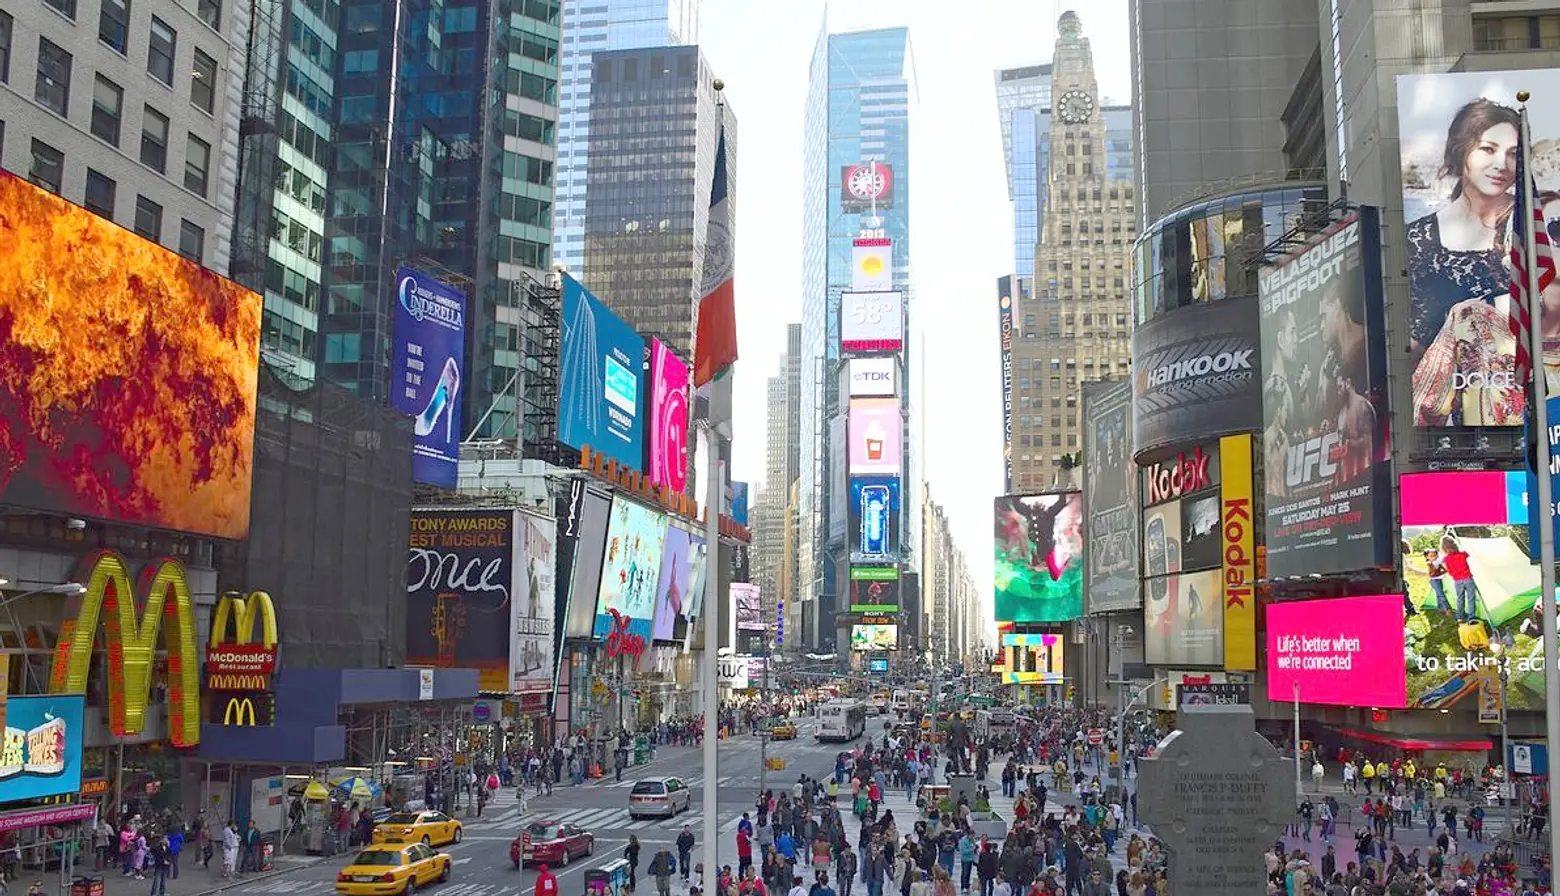 NYC Breaks Tourism Record in 2014, Sees Increase in Chinese Visitors